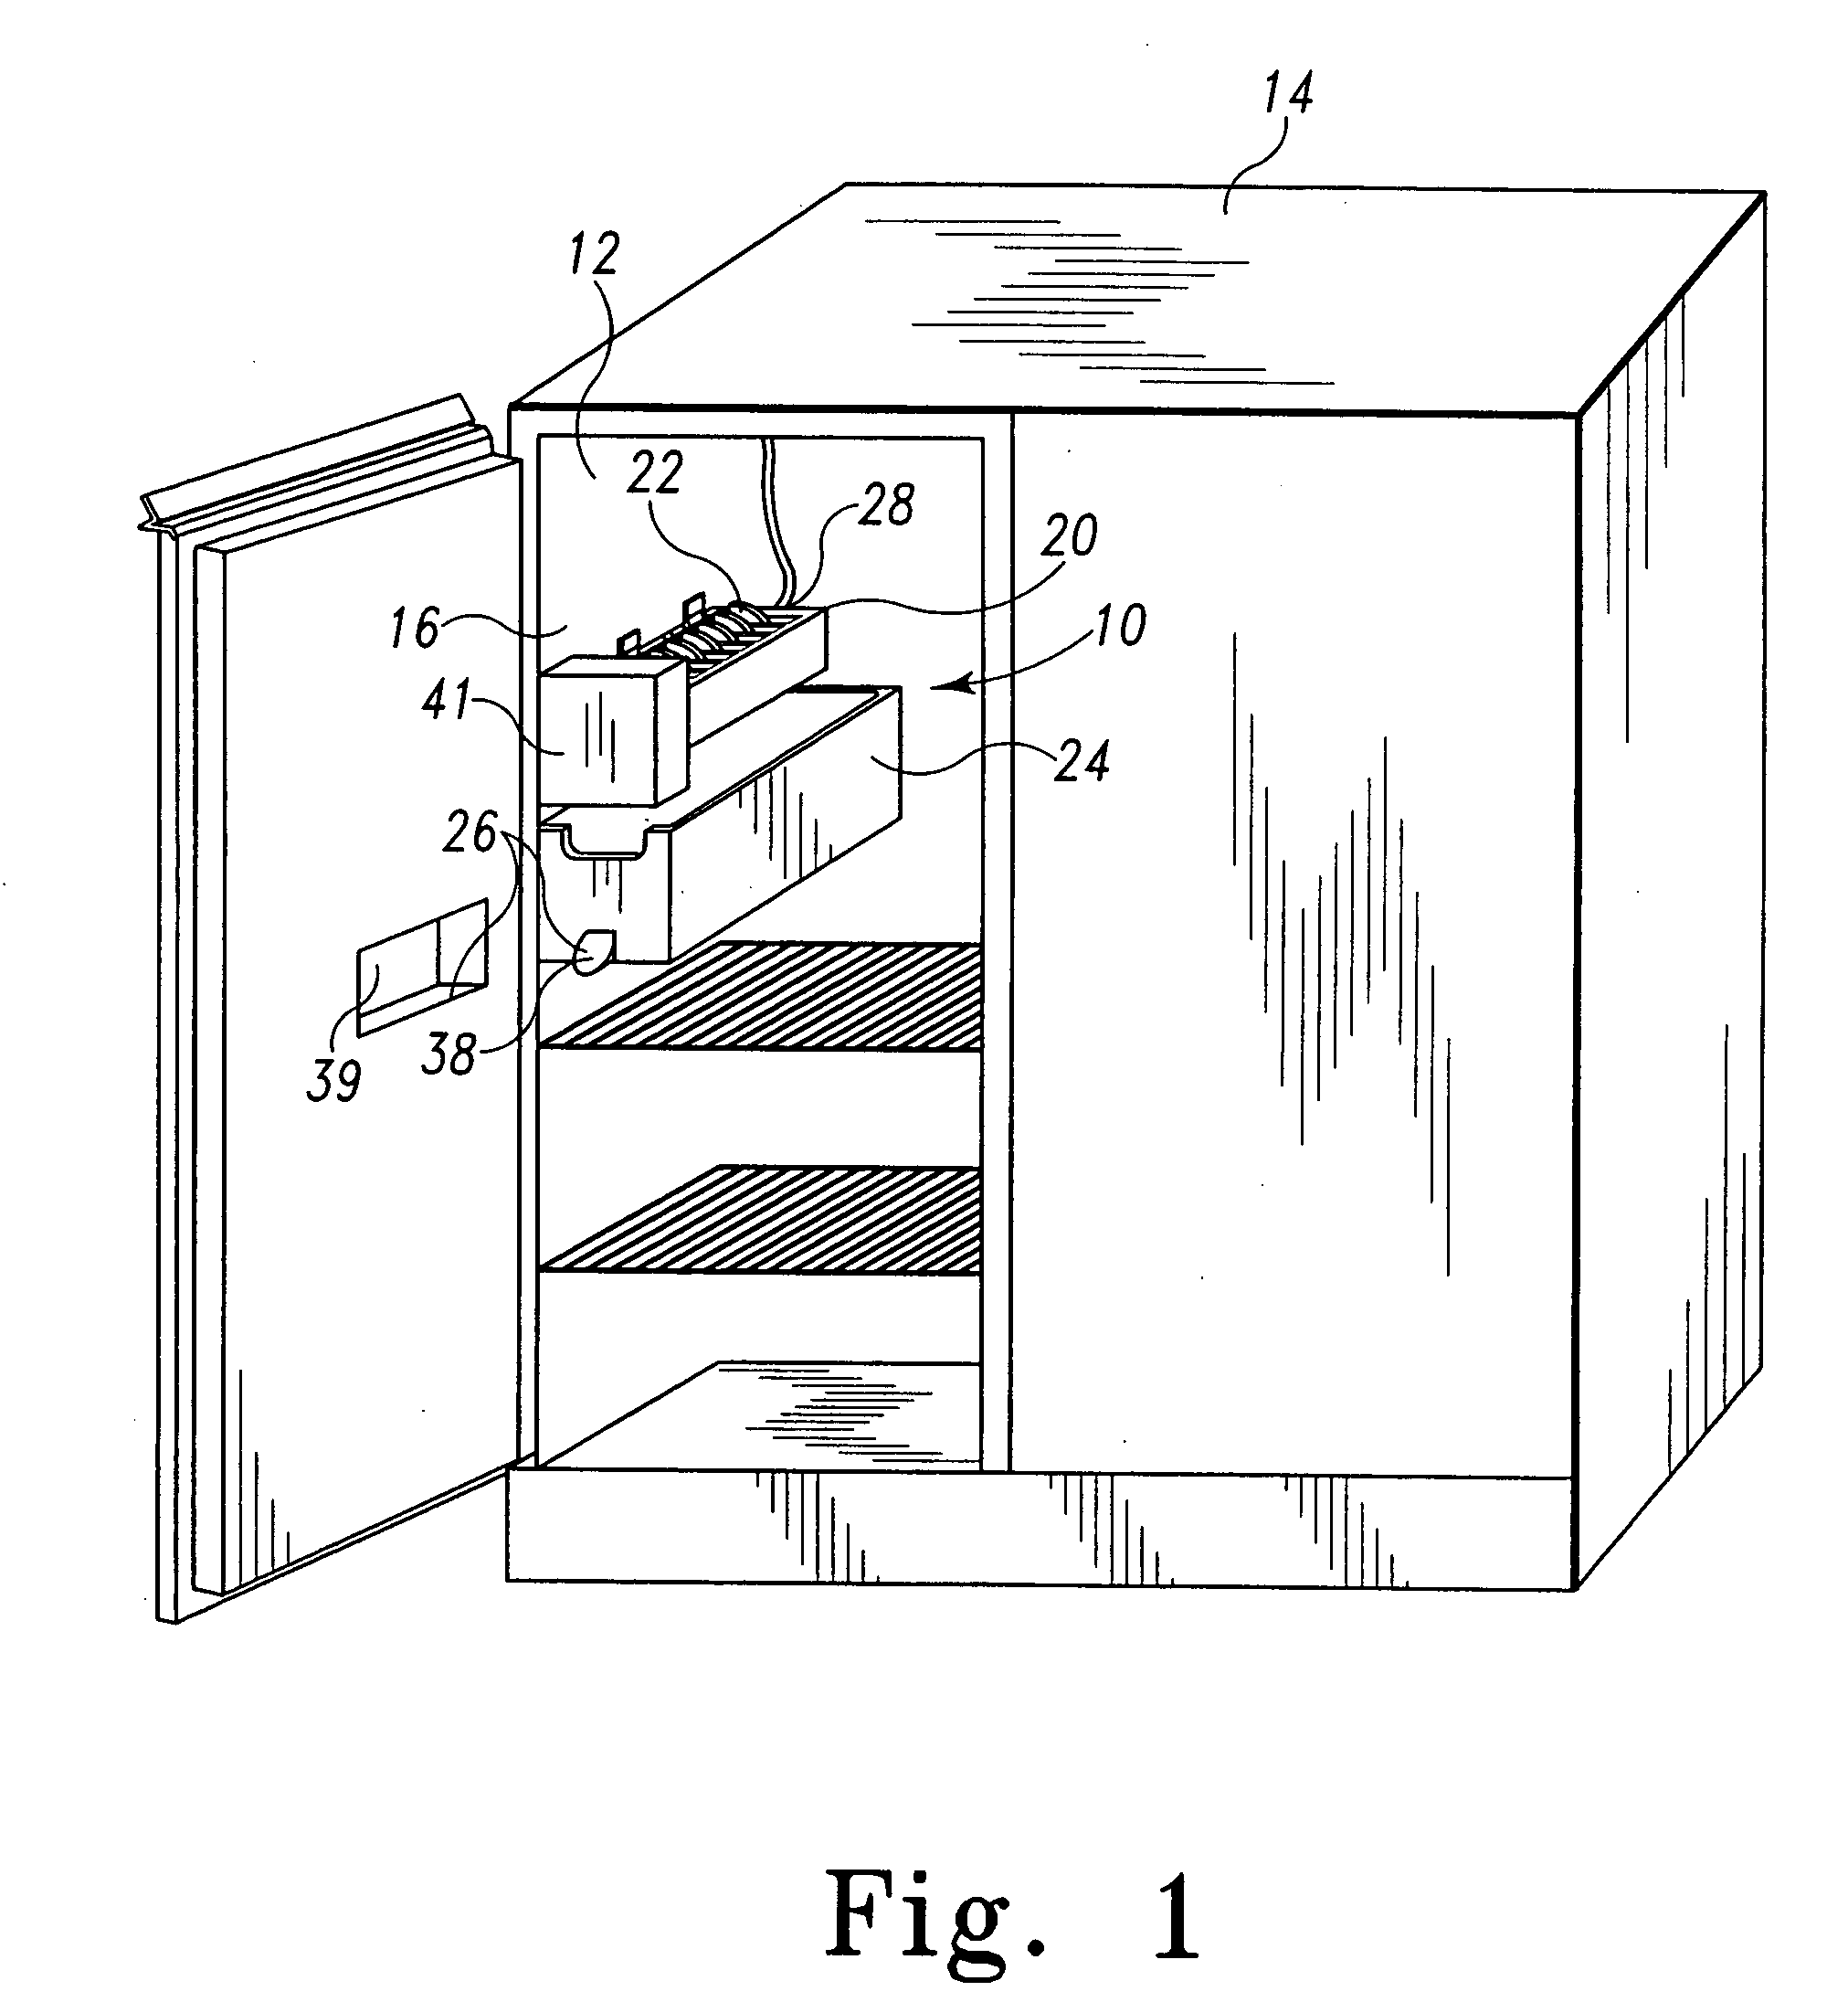 Method and device for eliminating connecting webs between ice cubes